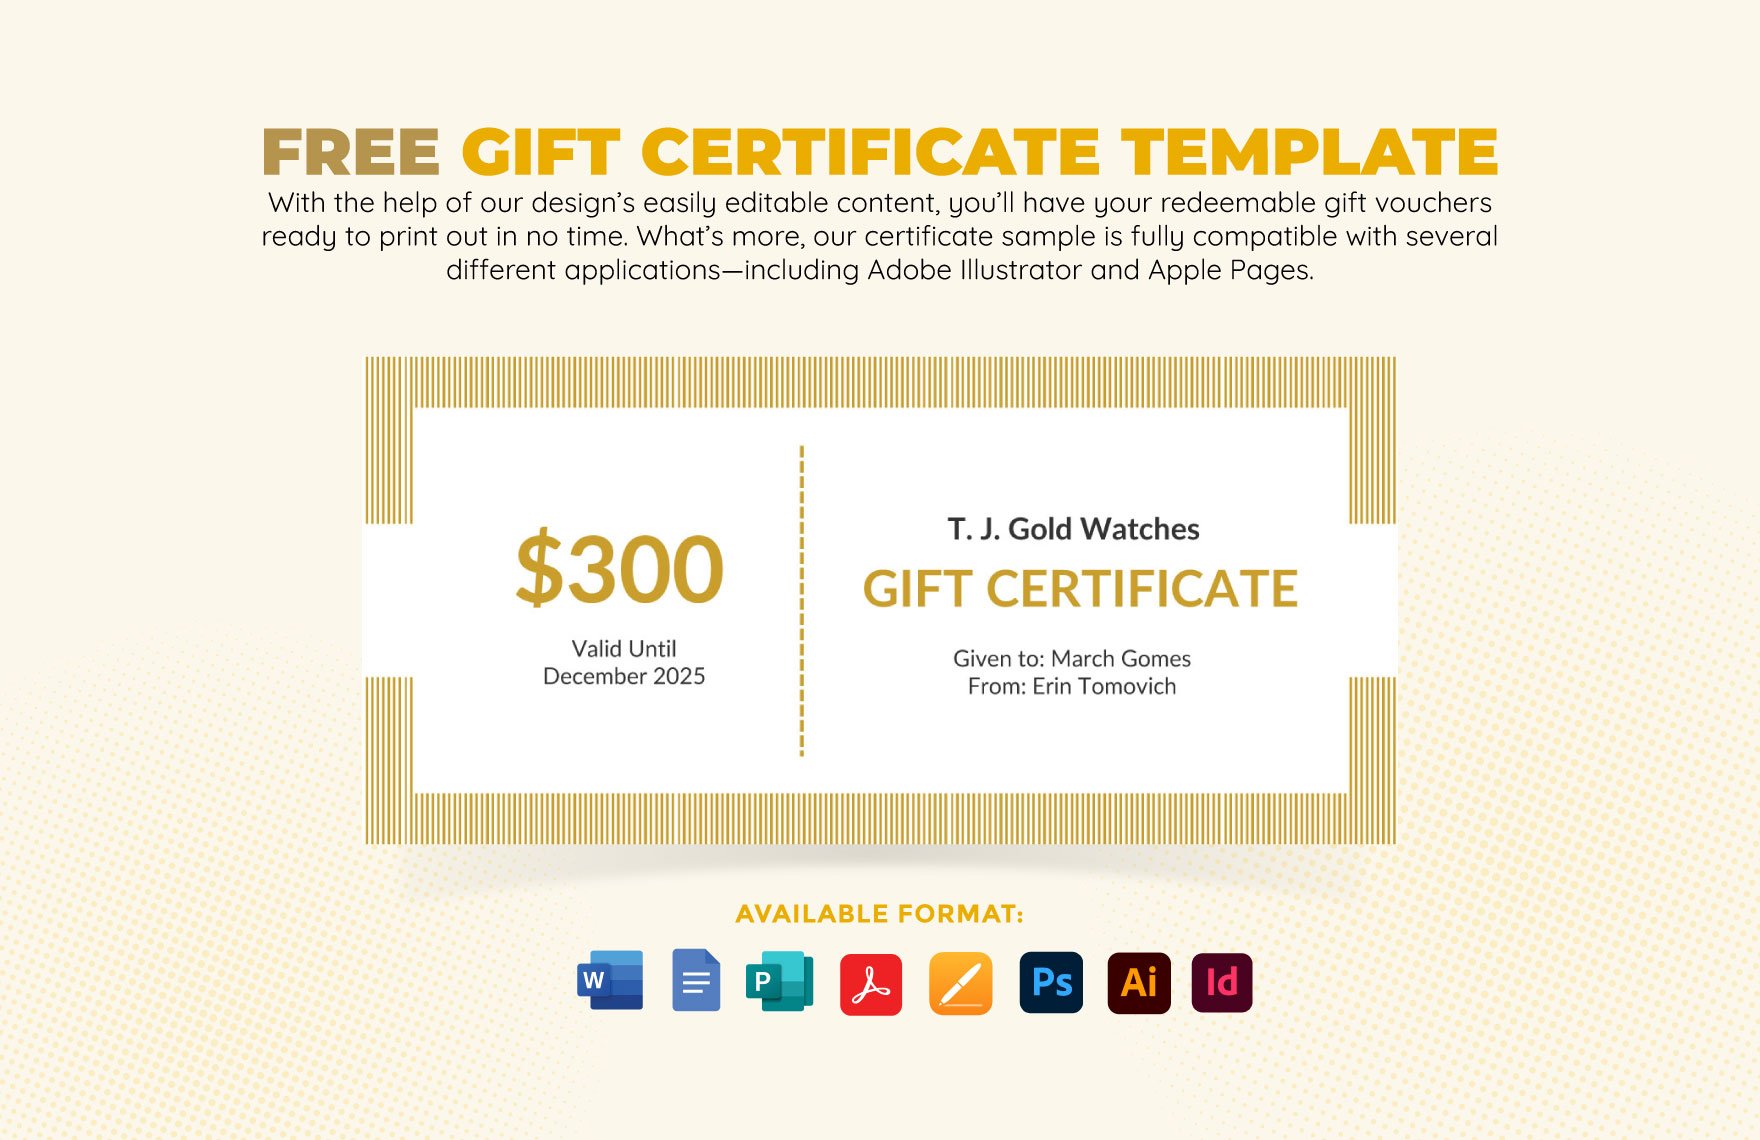 Gift Certificate Template in Word, Google Docs, PDF, Illustrator, PSD, Apple Pages, Publisher, InDesign